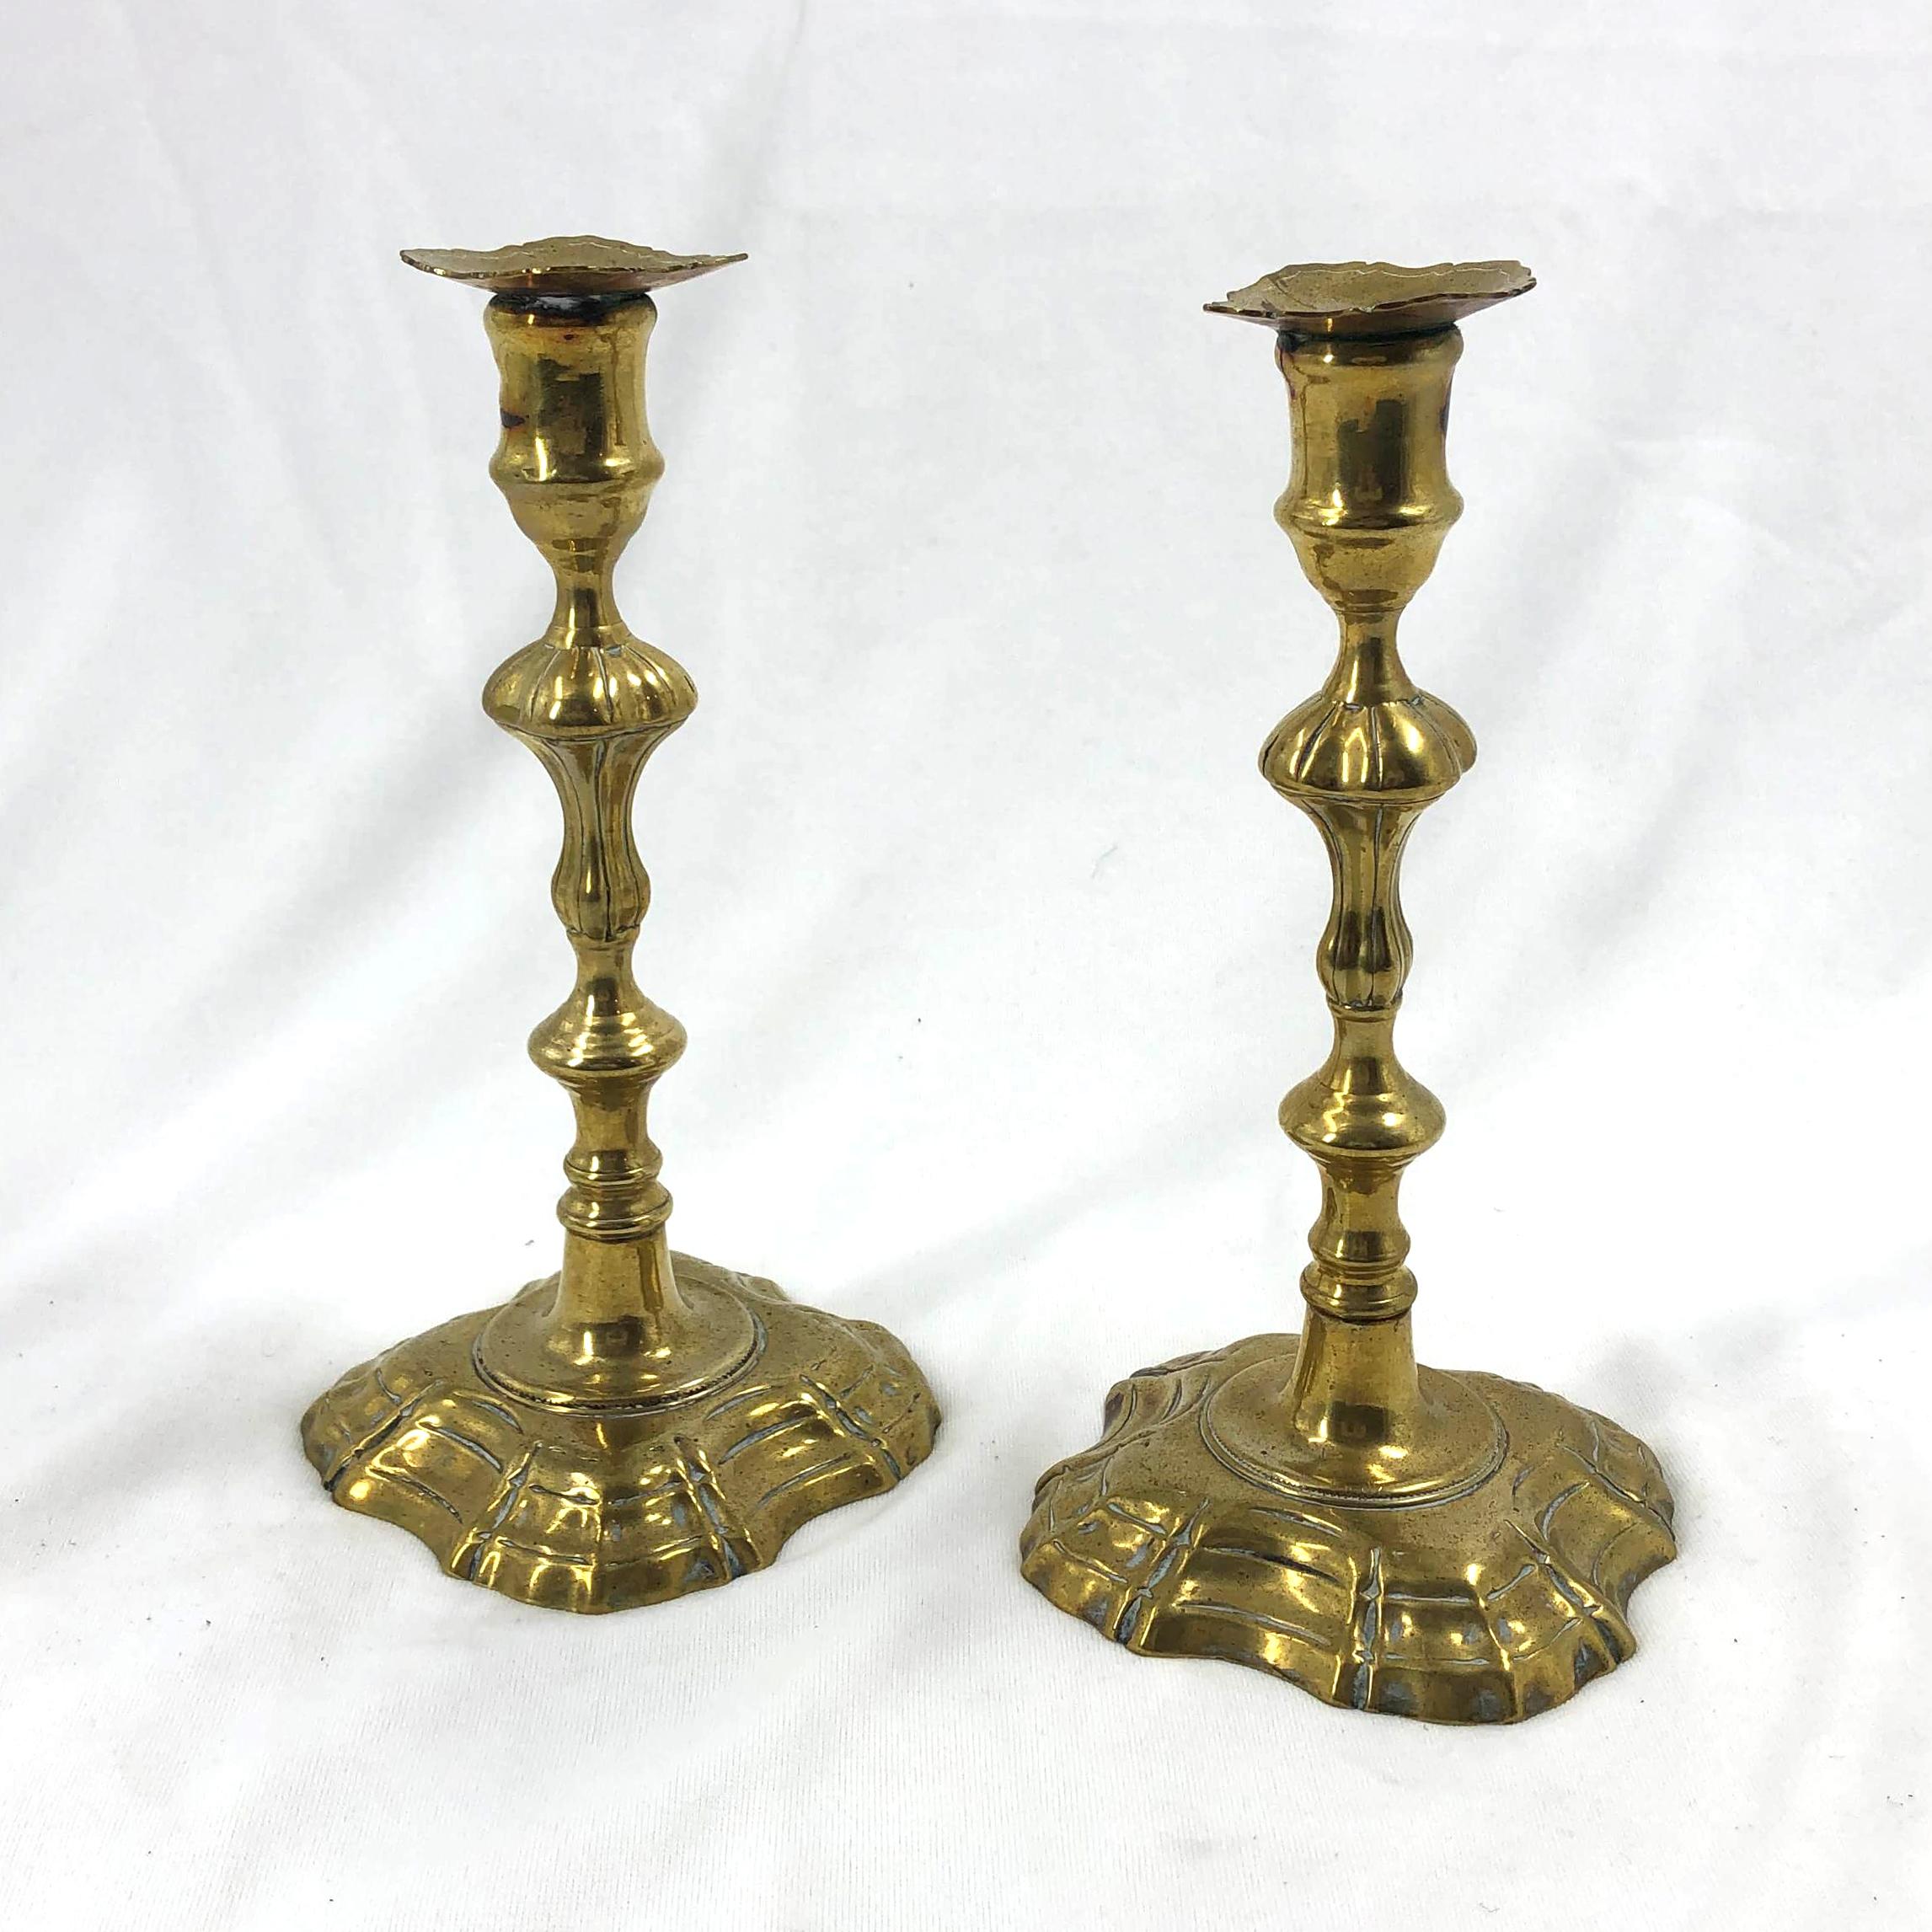 A pair of English Queen Anne turned brass candlesticks with stepped and lobed bases.